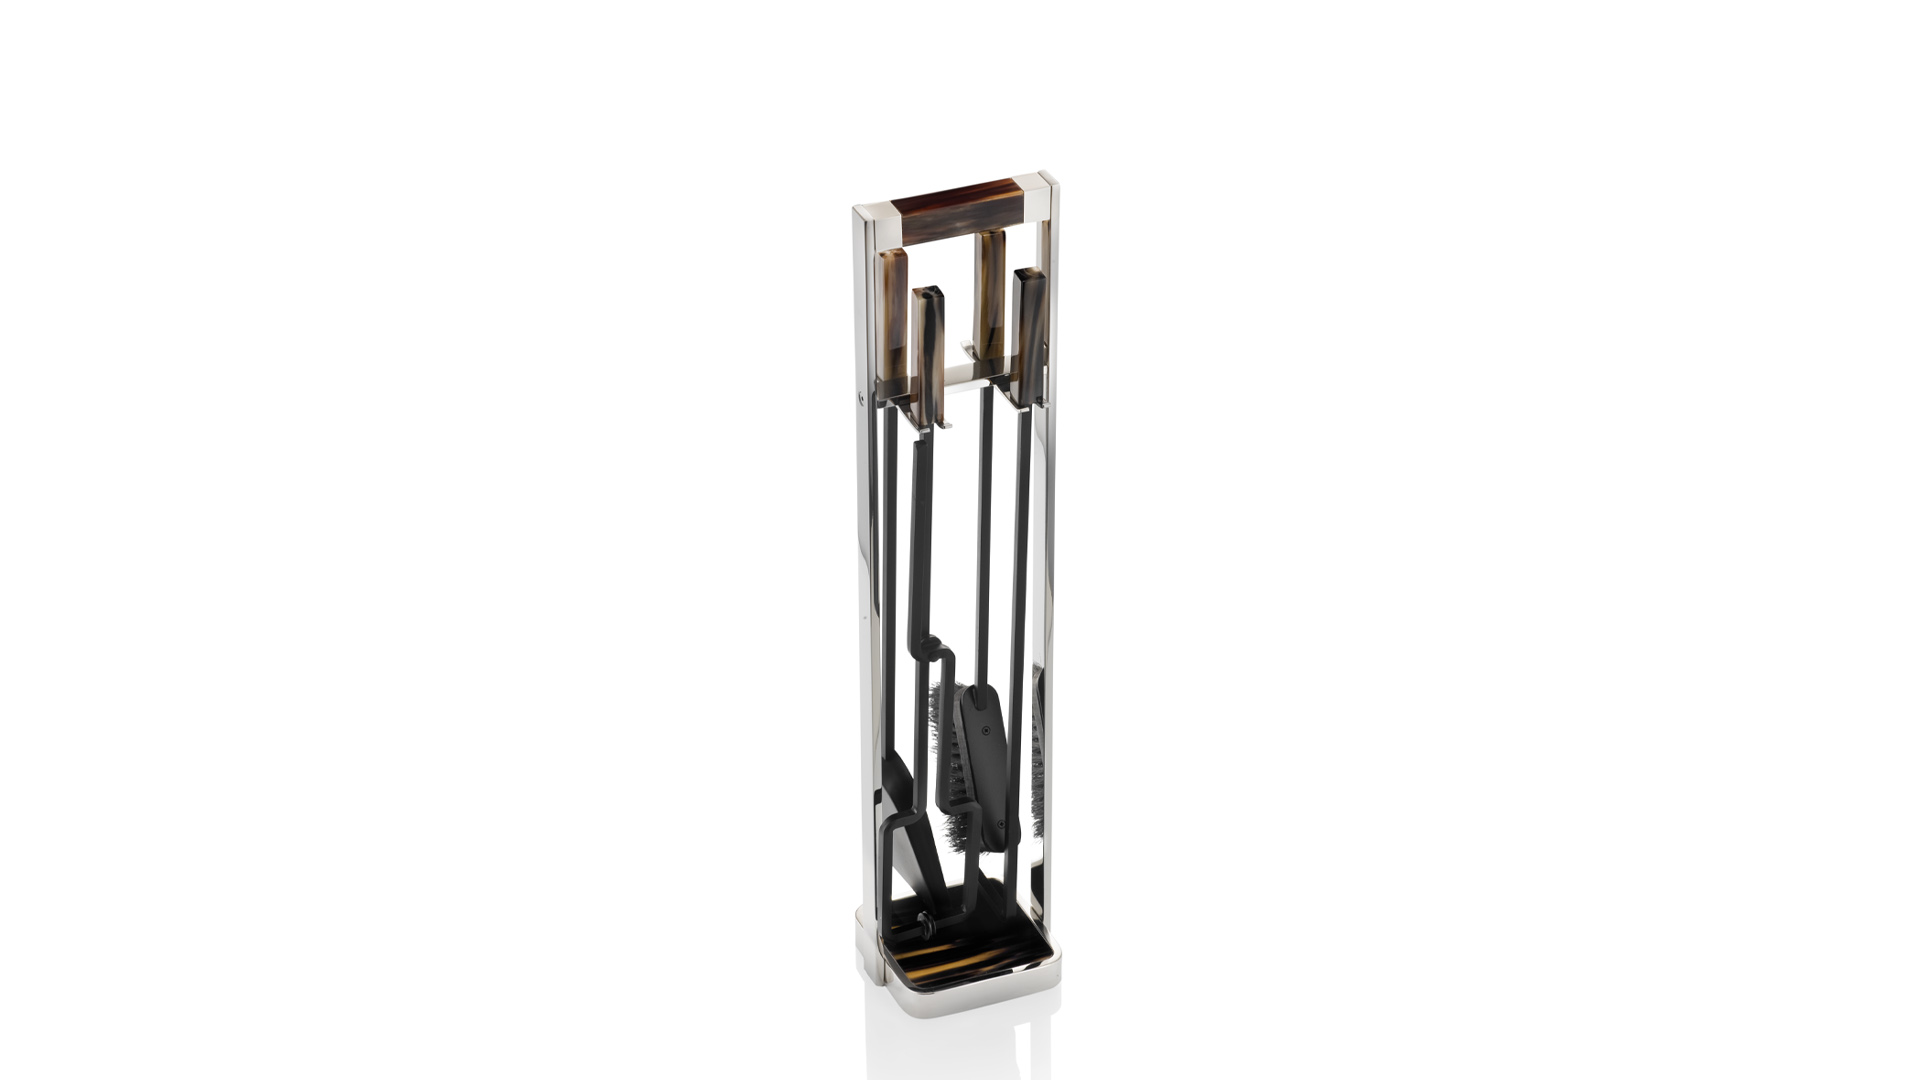 Coat stands and complementary furniture - Vesta fireplace set in horn and stainless steel - Arcahorn